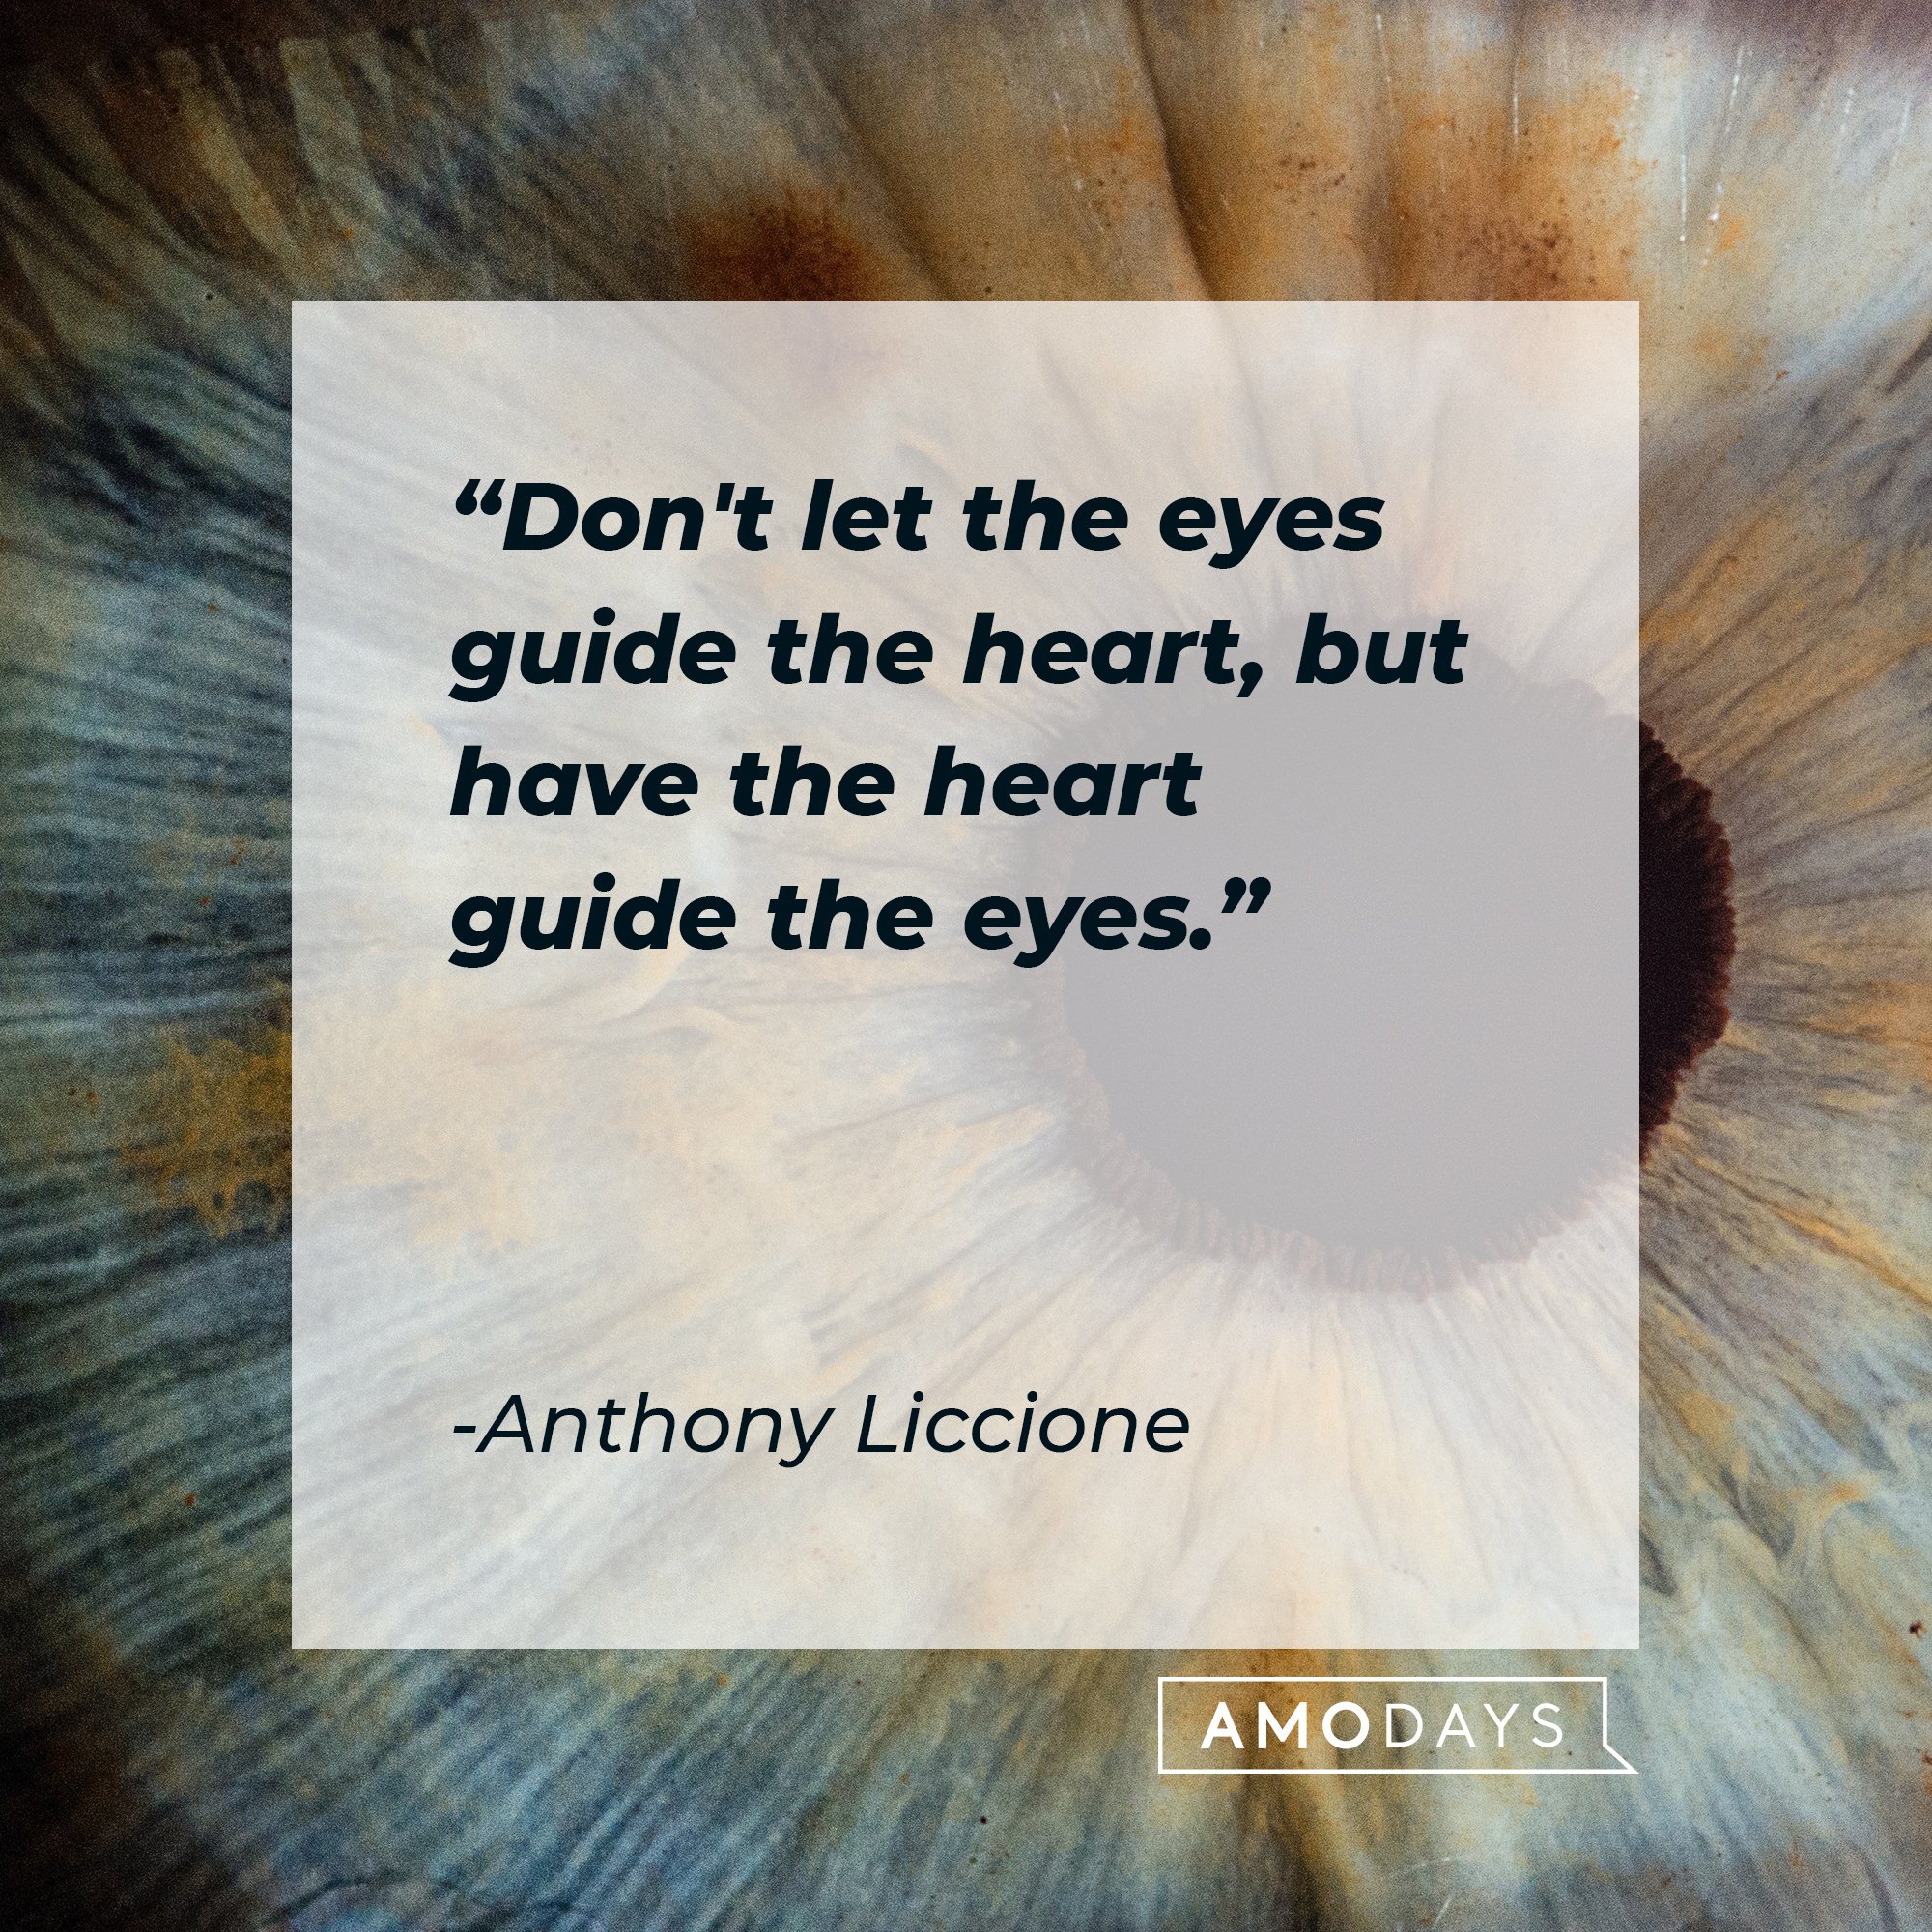   Anthony Liccione's quote: "Don't let the eyes guide the heart, but have the heart guide the eyes." | Image: AmoDays